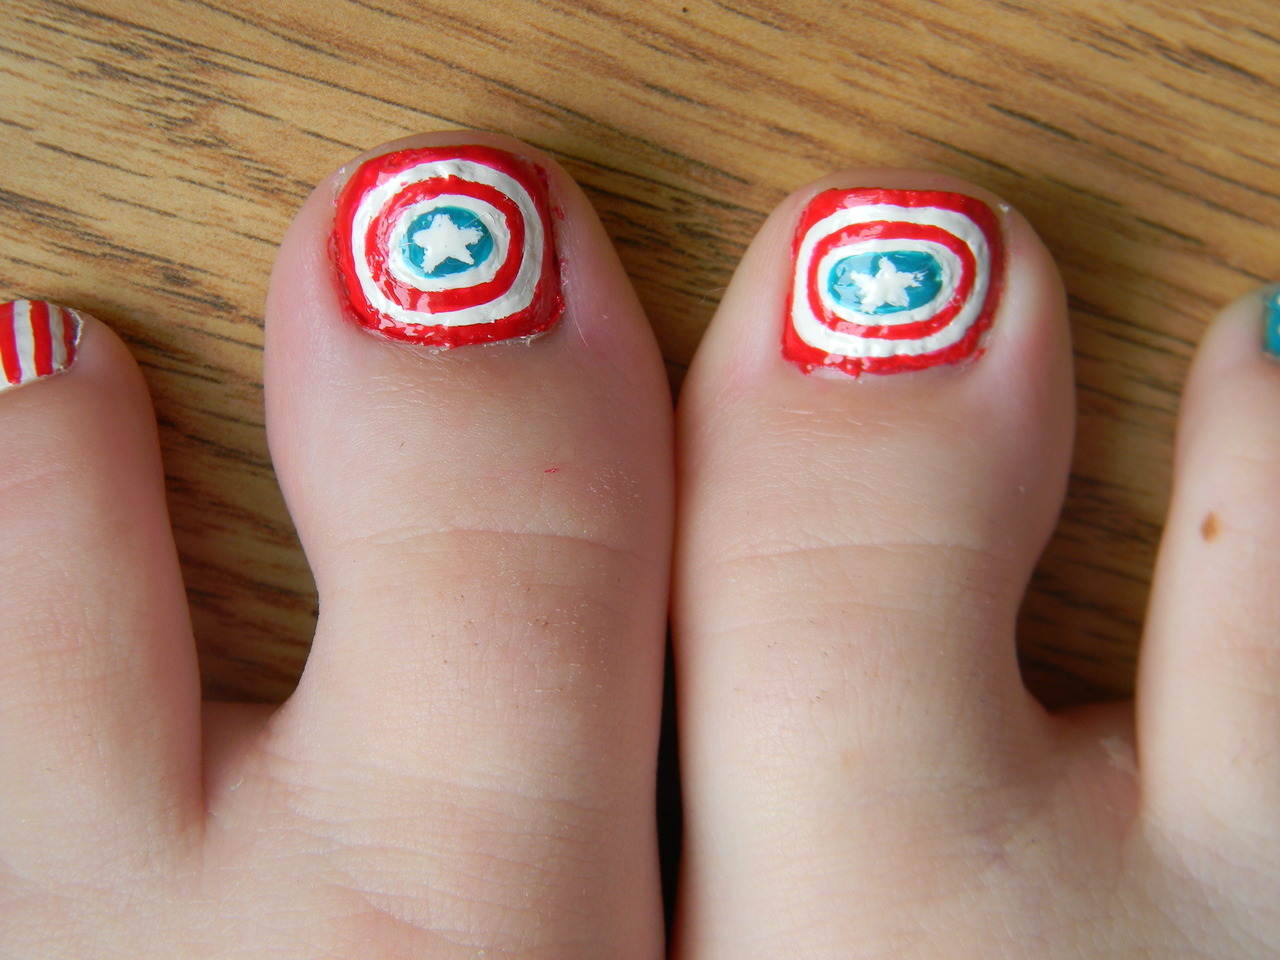 Anyway~ Captain America inspired toe nail art!!!!!! I love this design!